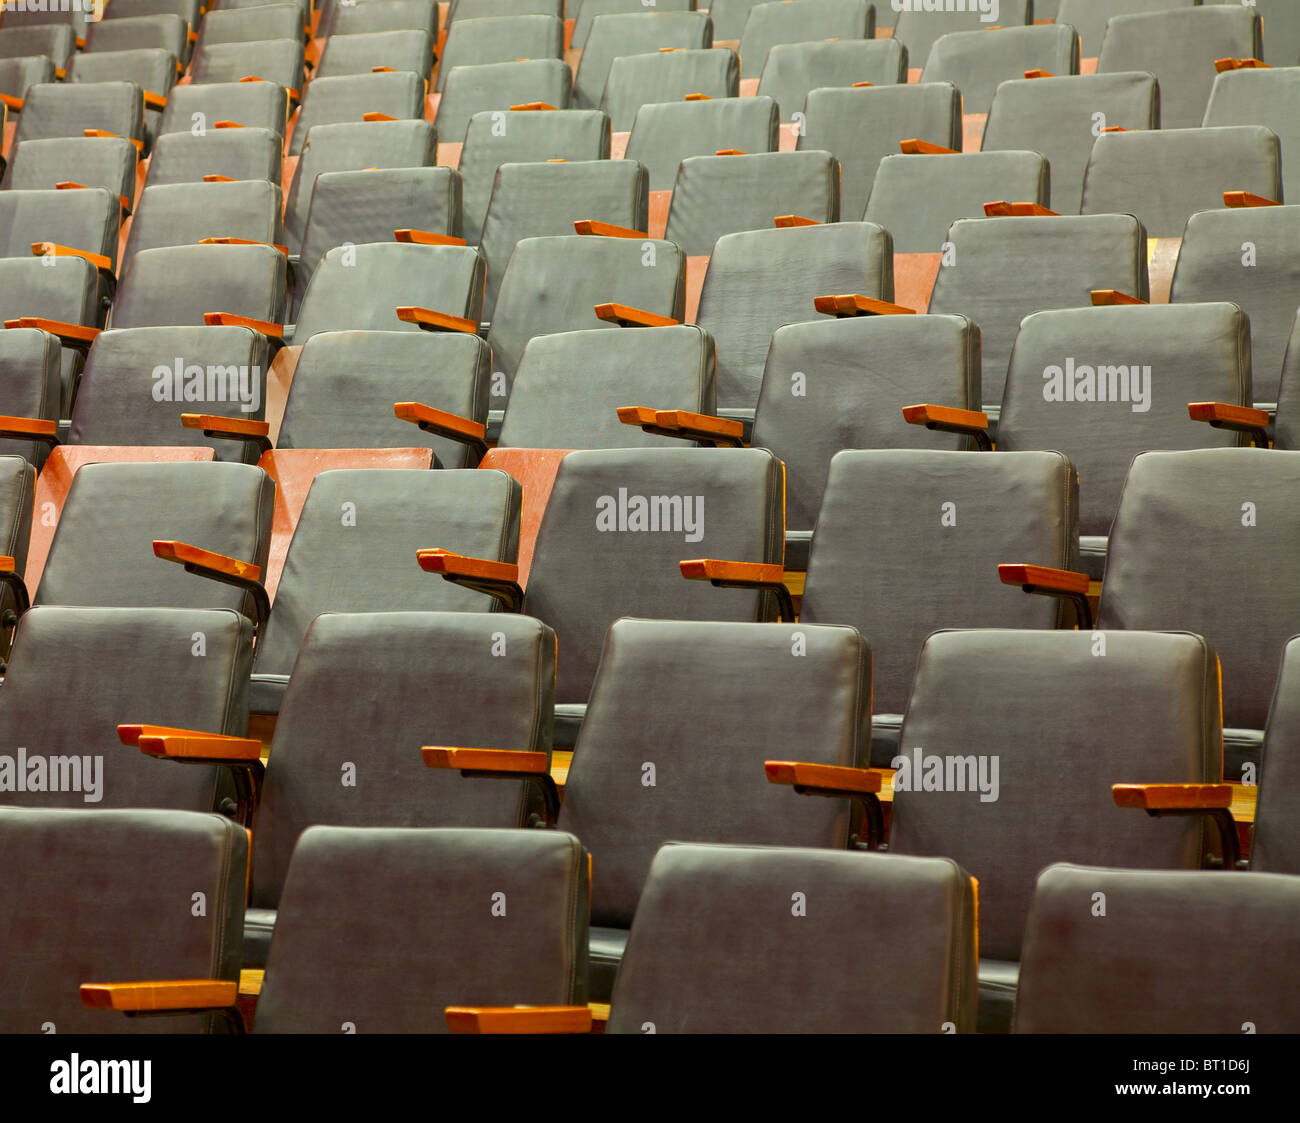 Rows of seats at an old cinema Stock Photo